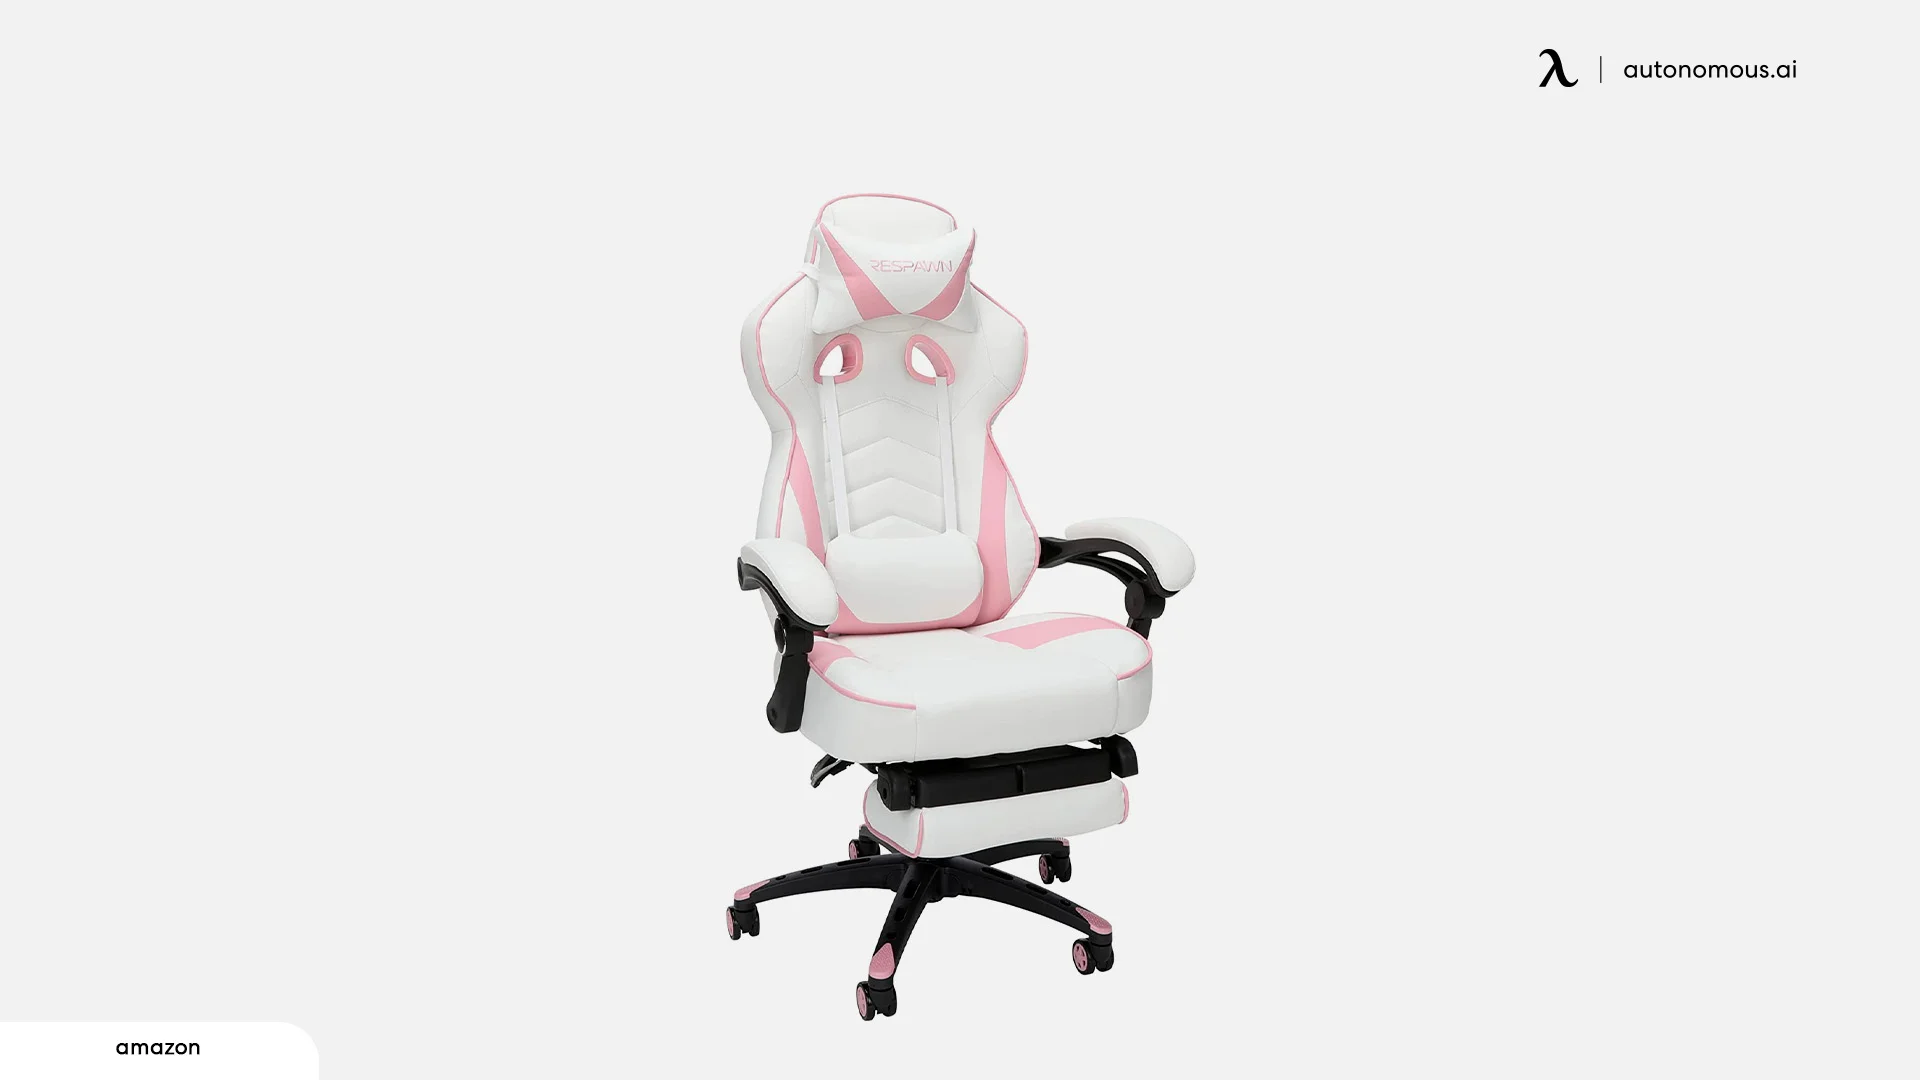 Respawn RSP-110 Racing Gaming Chair